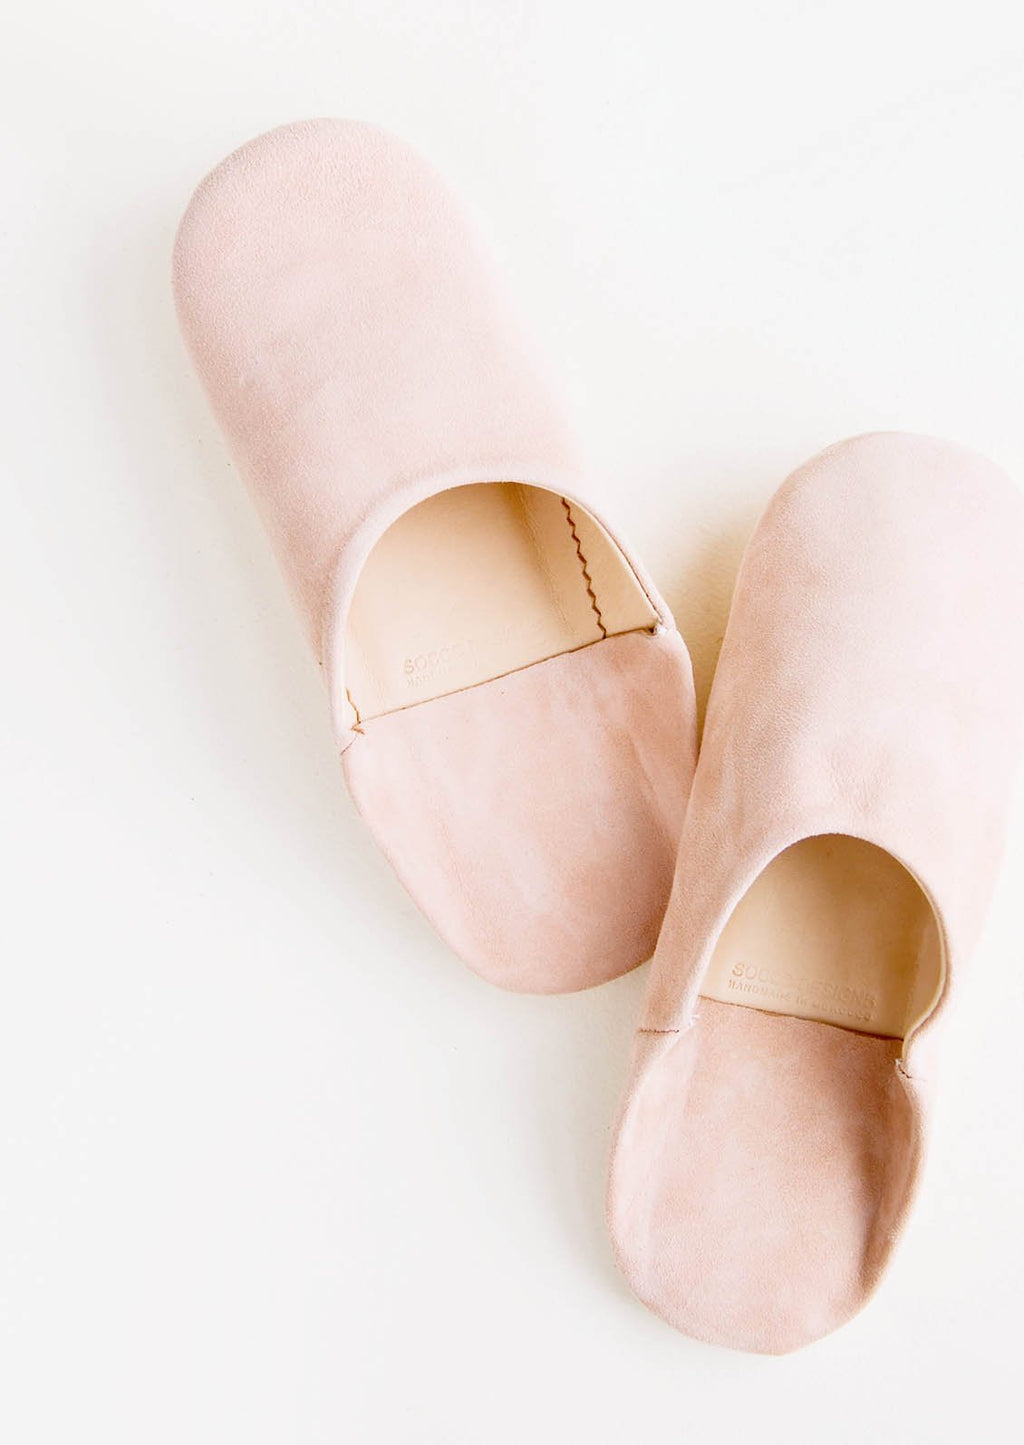 US 5-6 / Blush: Pair of suede house slippers in blush pink